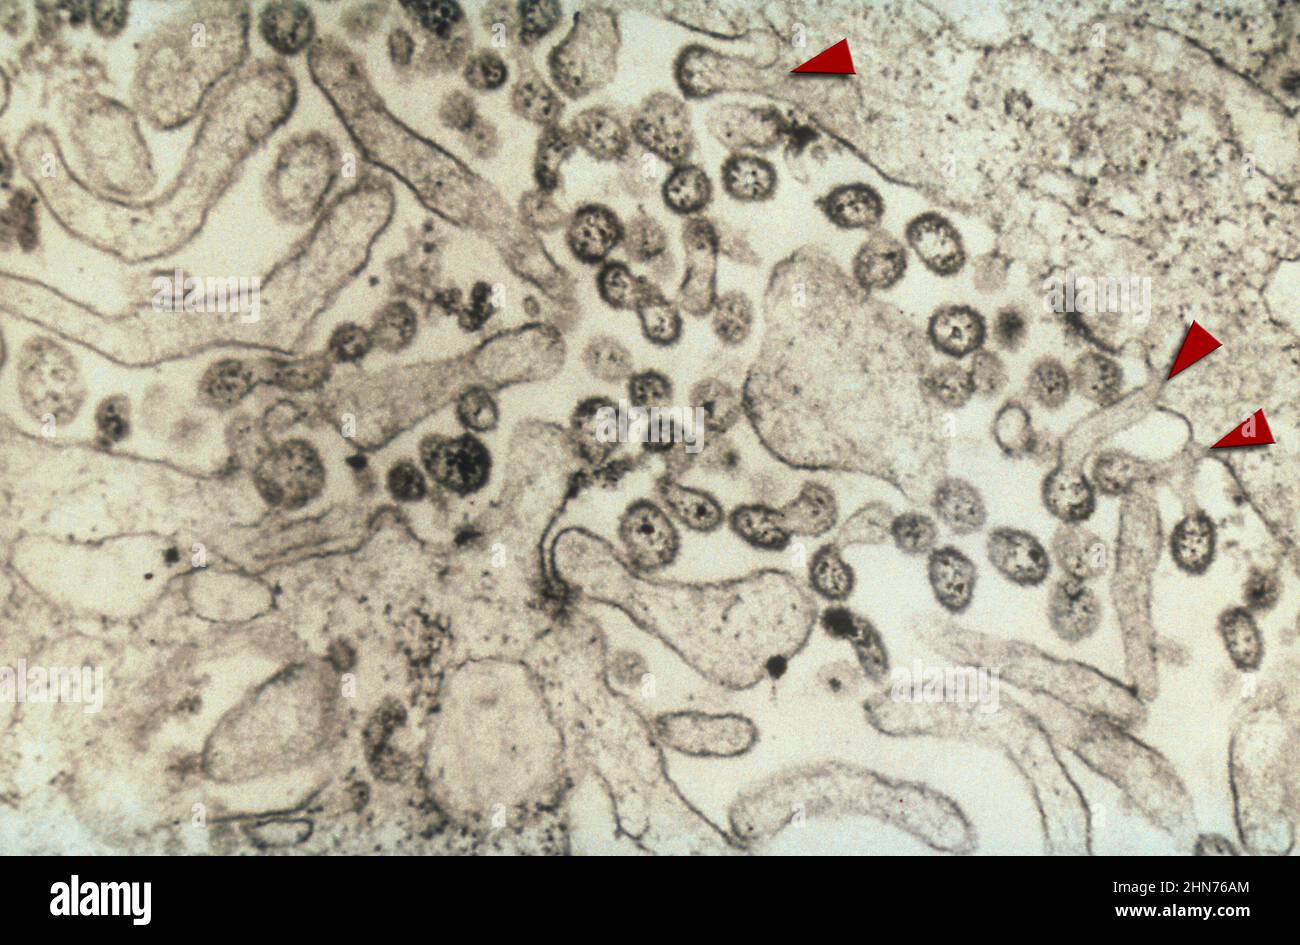 TEM image, depicting numerous Lassa virus virions. Many of the virions can be seen outside the confines of the host cell, but some have broken away Stock Photo